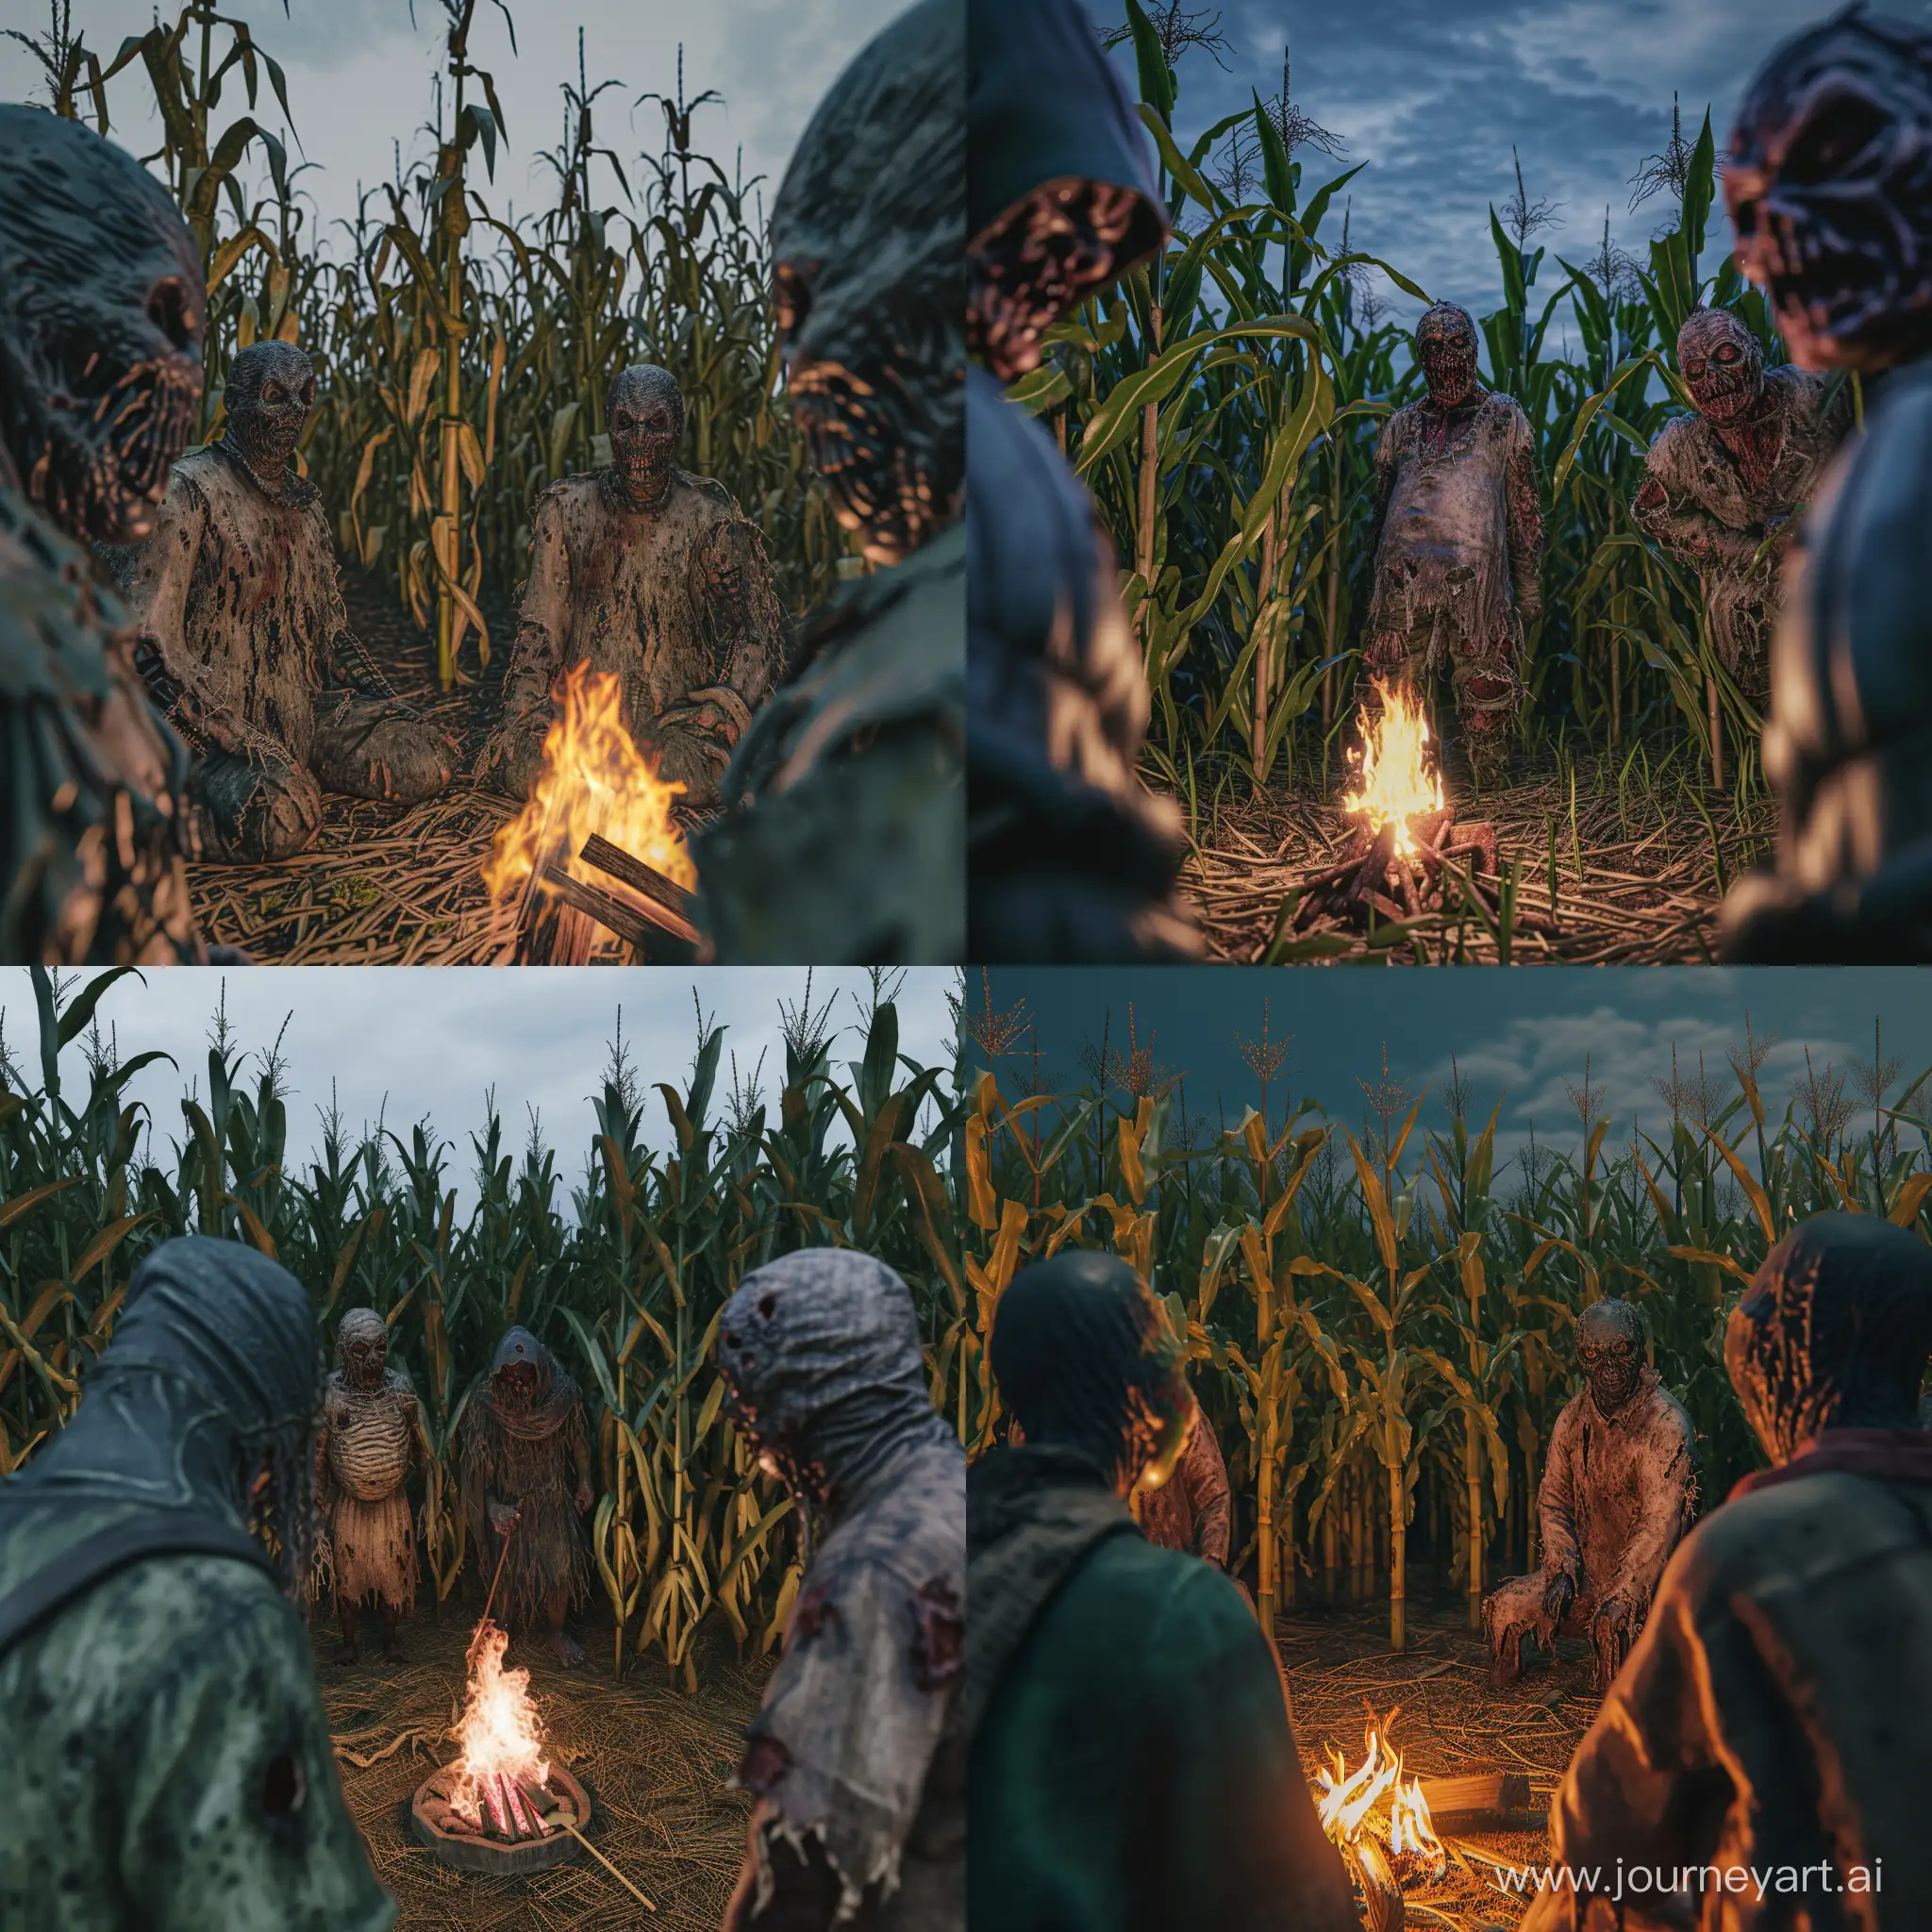 Eerie-Midnight-Gathering-in-a-Cornfield-Creepy-Figures-Masks-and-Campfire